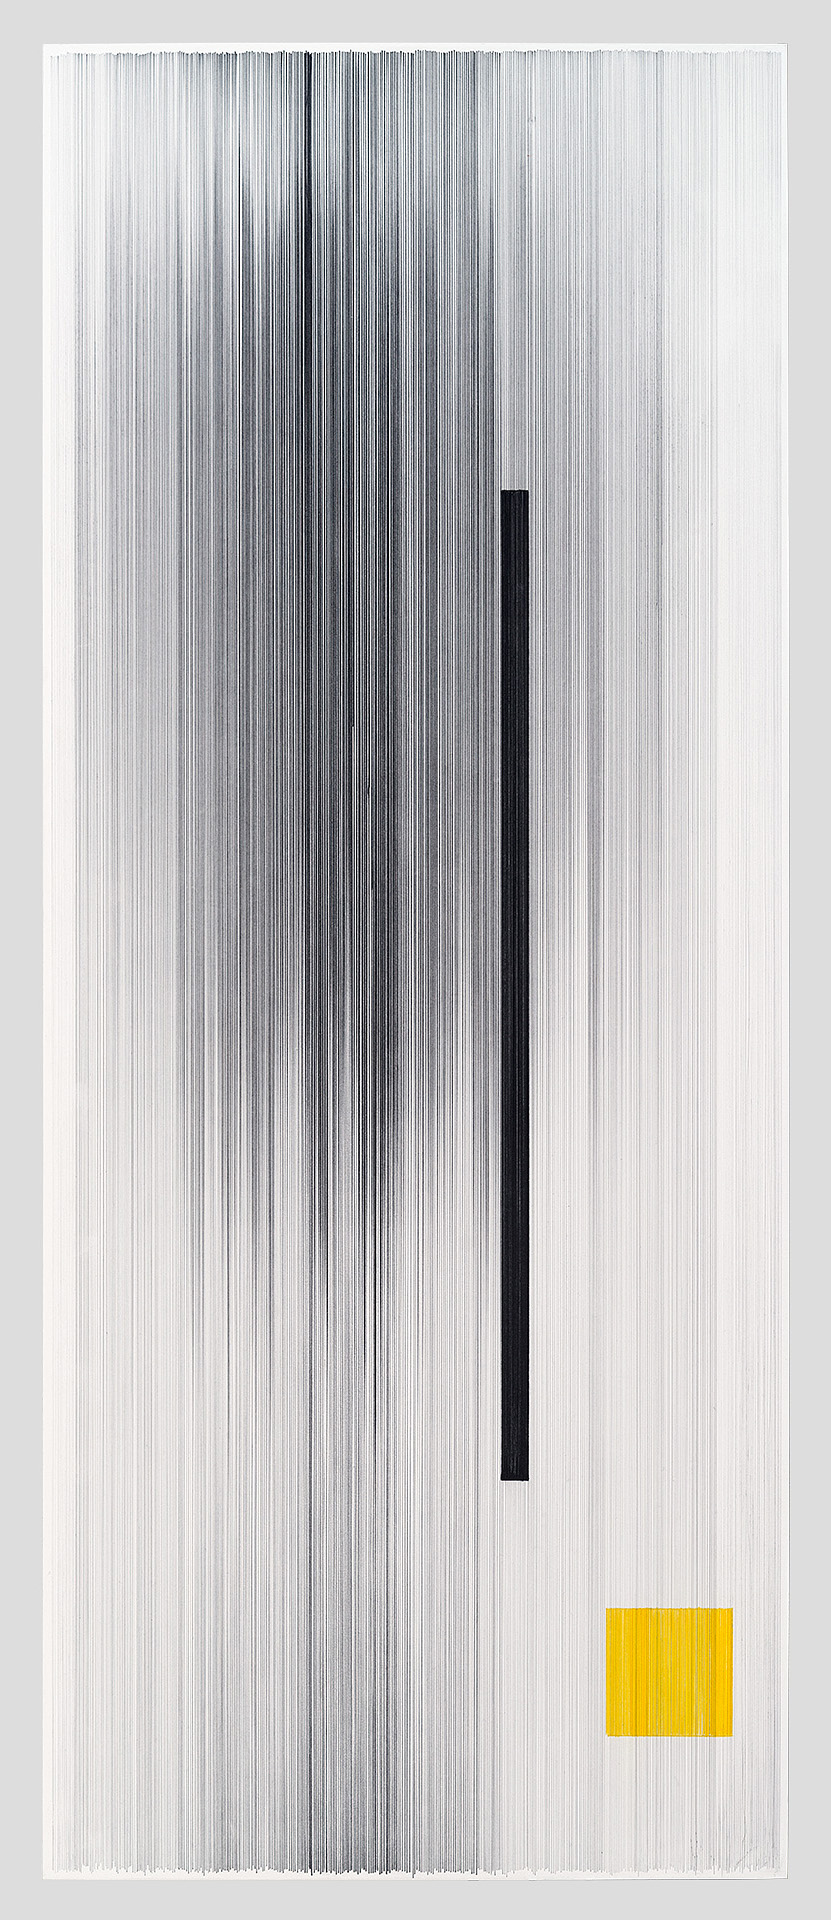    notations 01   2014 graphite and colored pencil on mat board 58 x 24 inches 